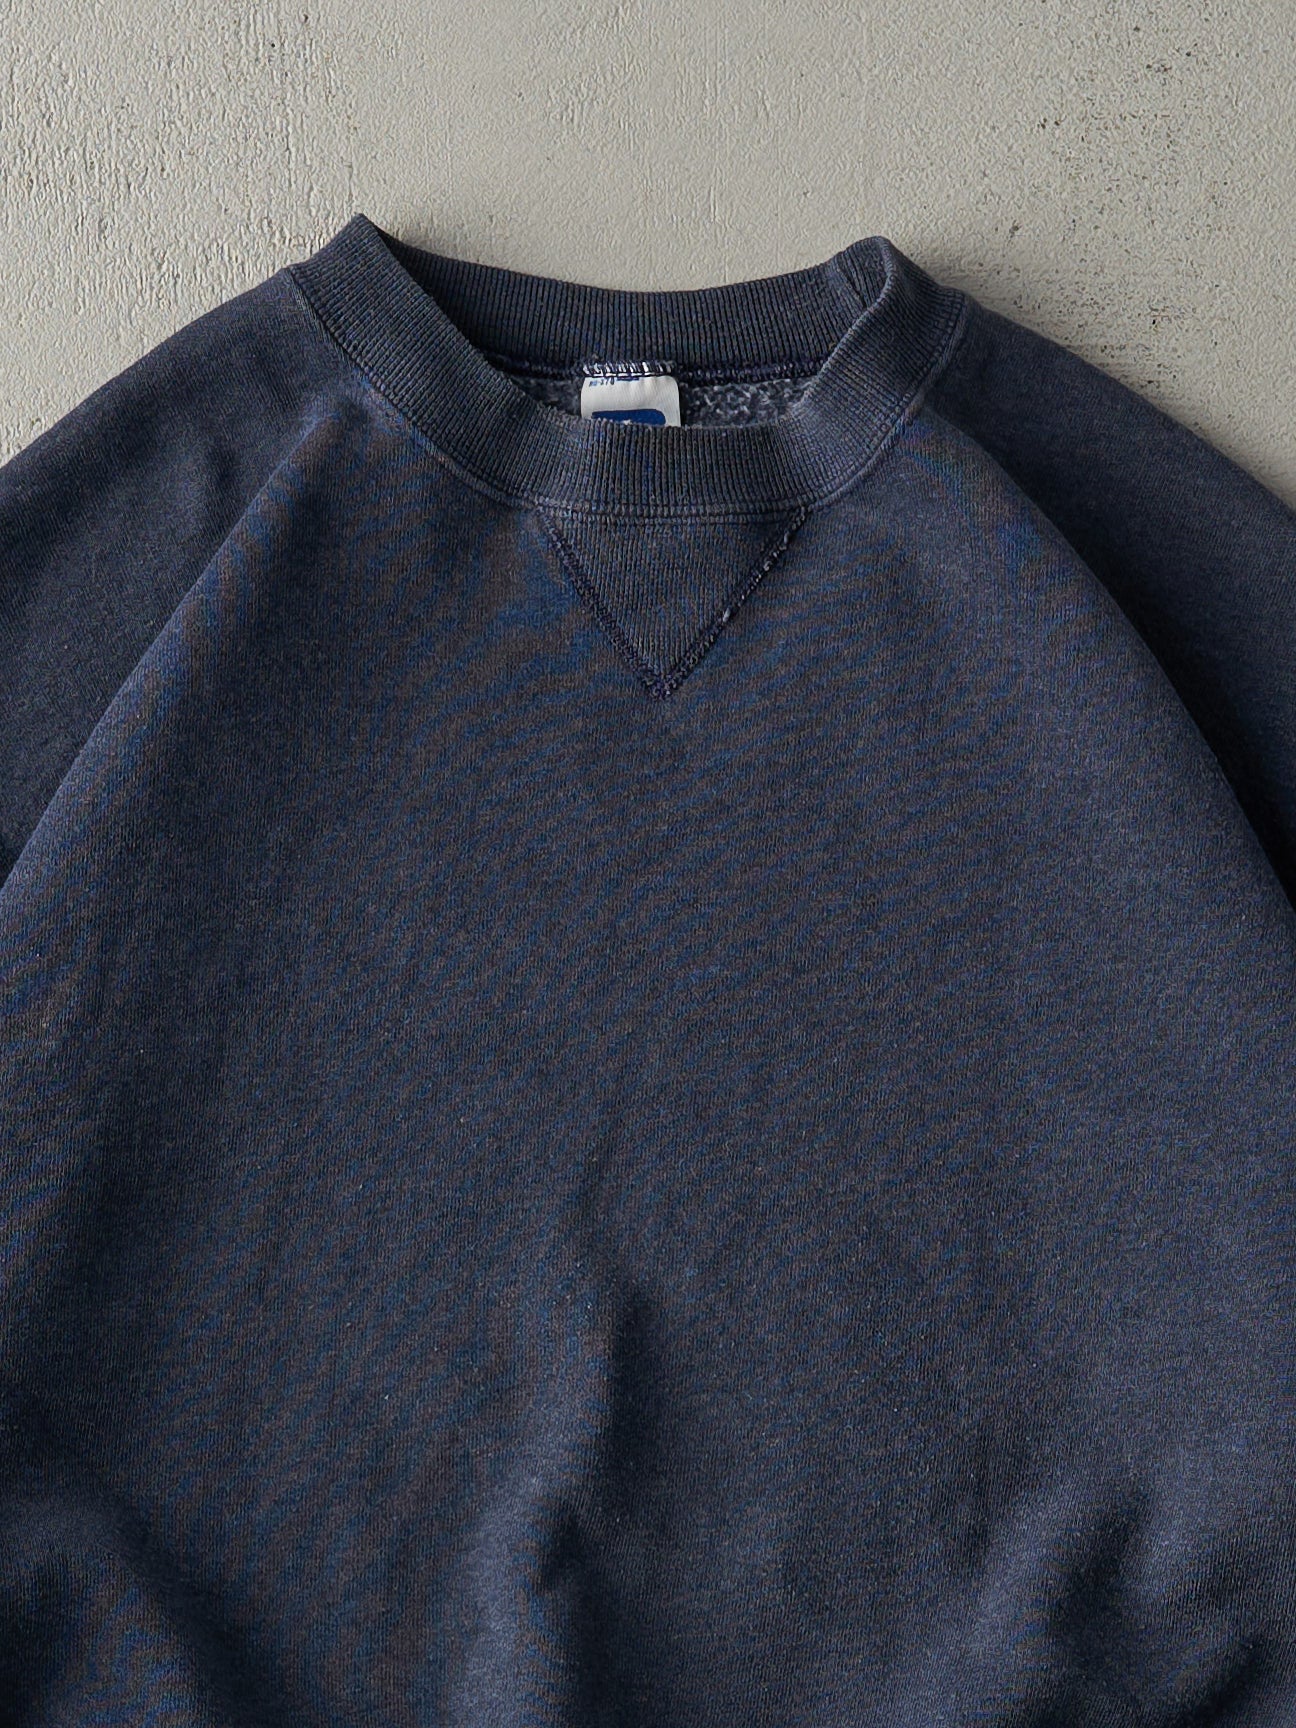 Vintage 90s Washed Navy Russell Athletics Blank Crewneck (M)